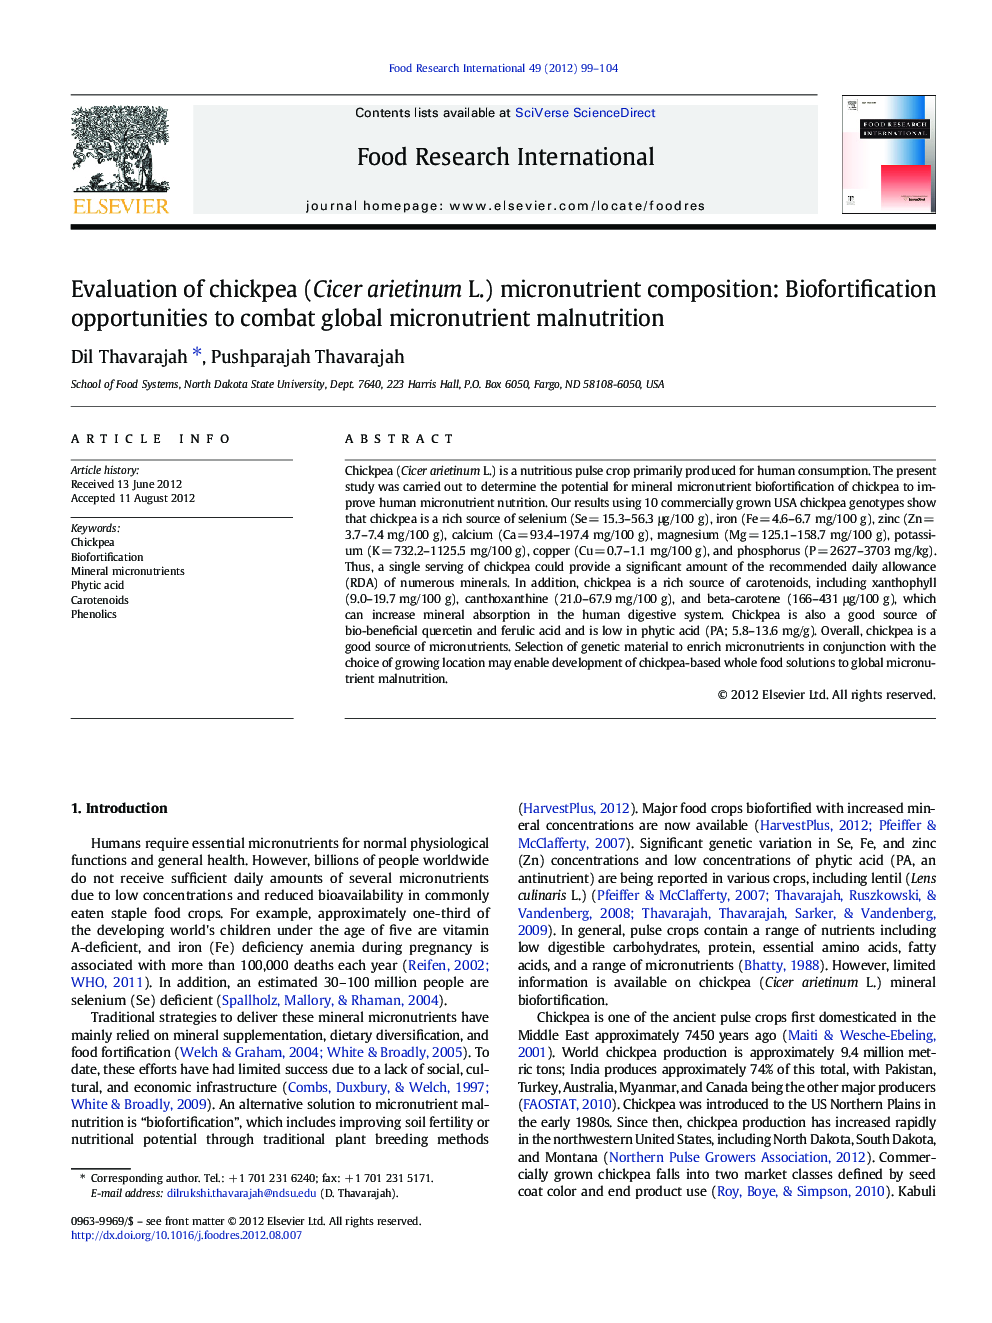 Evaluation of chickpea (Cicer arietinum L.) micronutrient composition: Biofortification opportunities to combat global micronutrient malnutrition